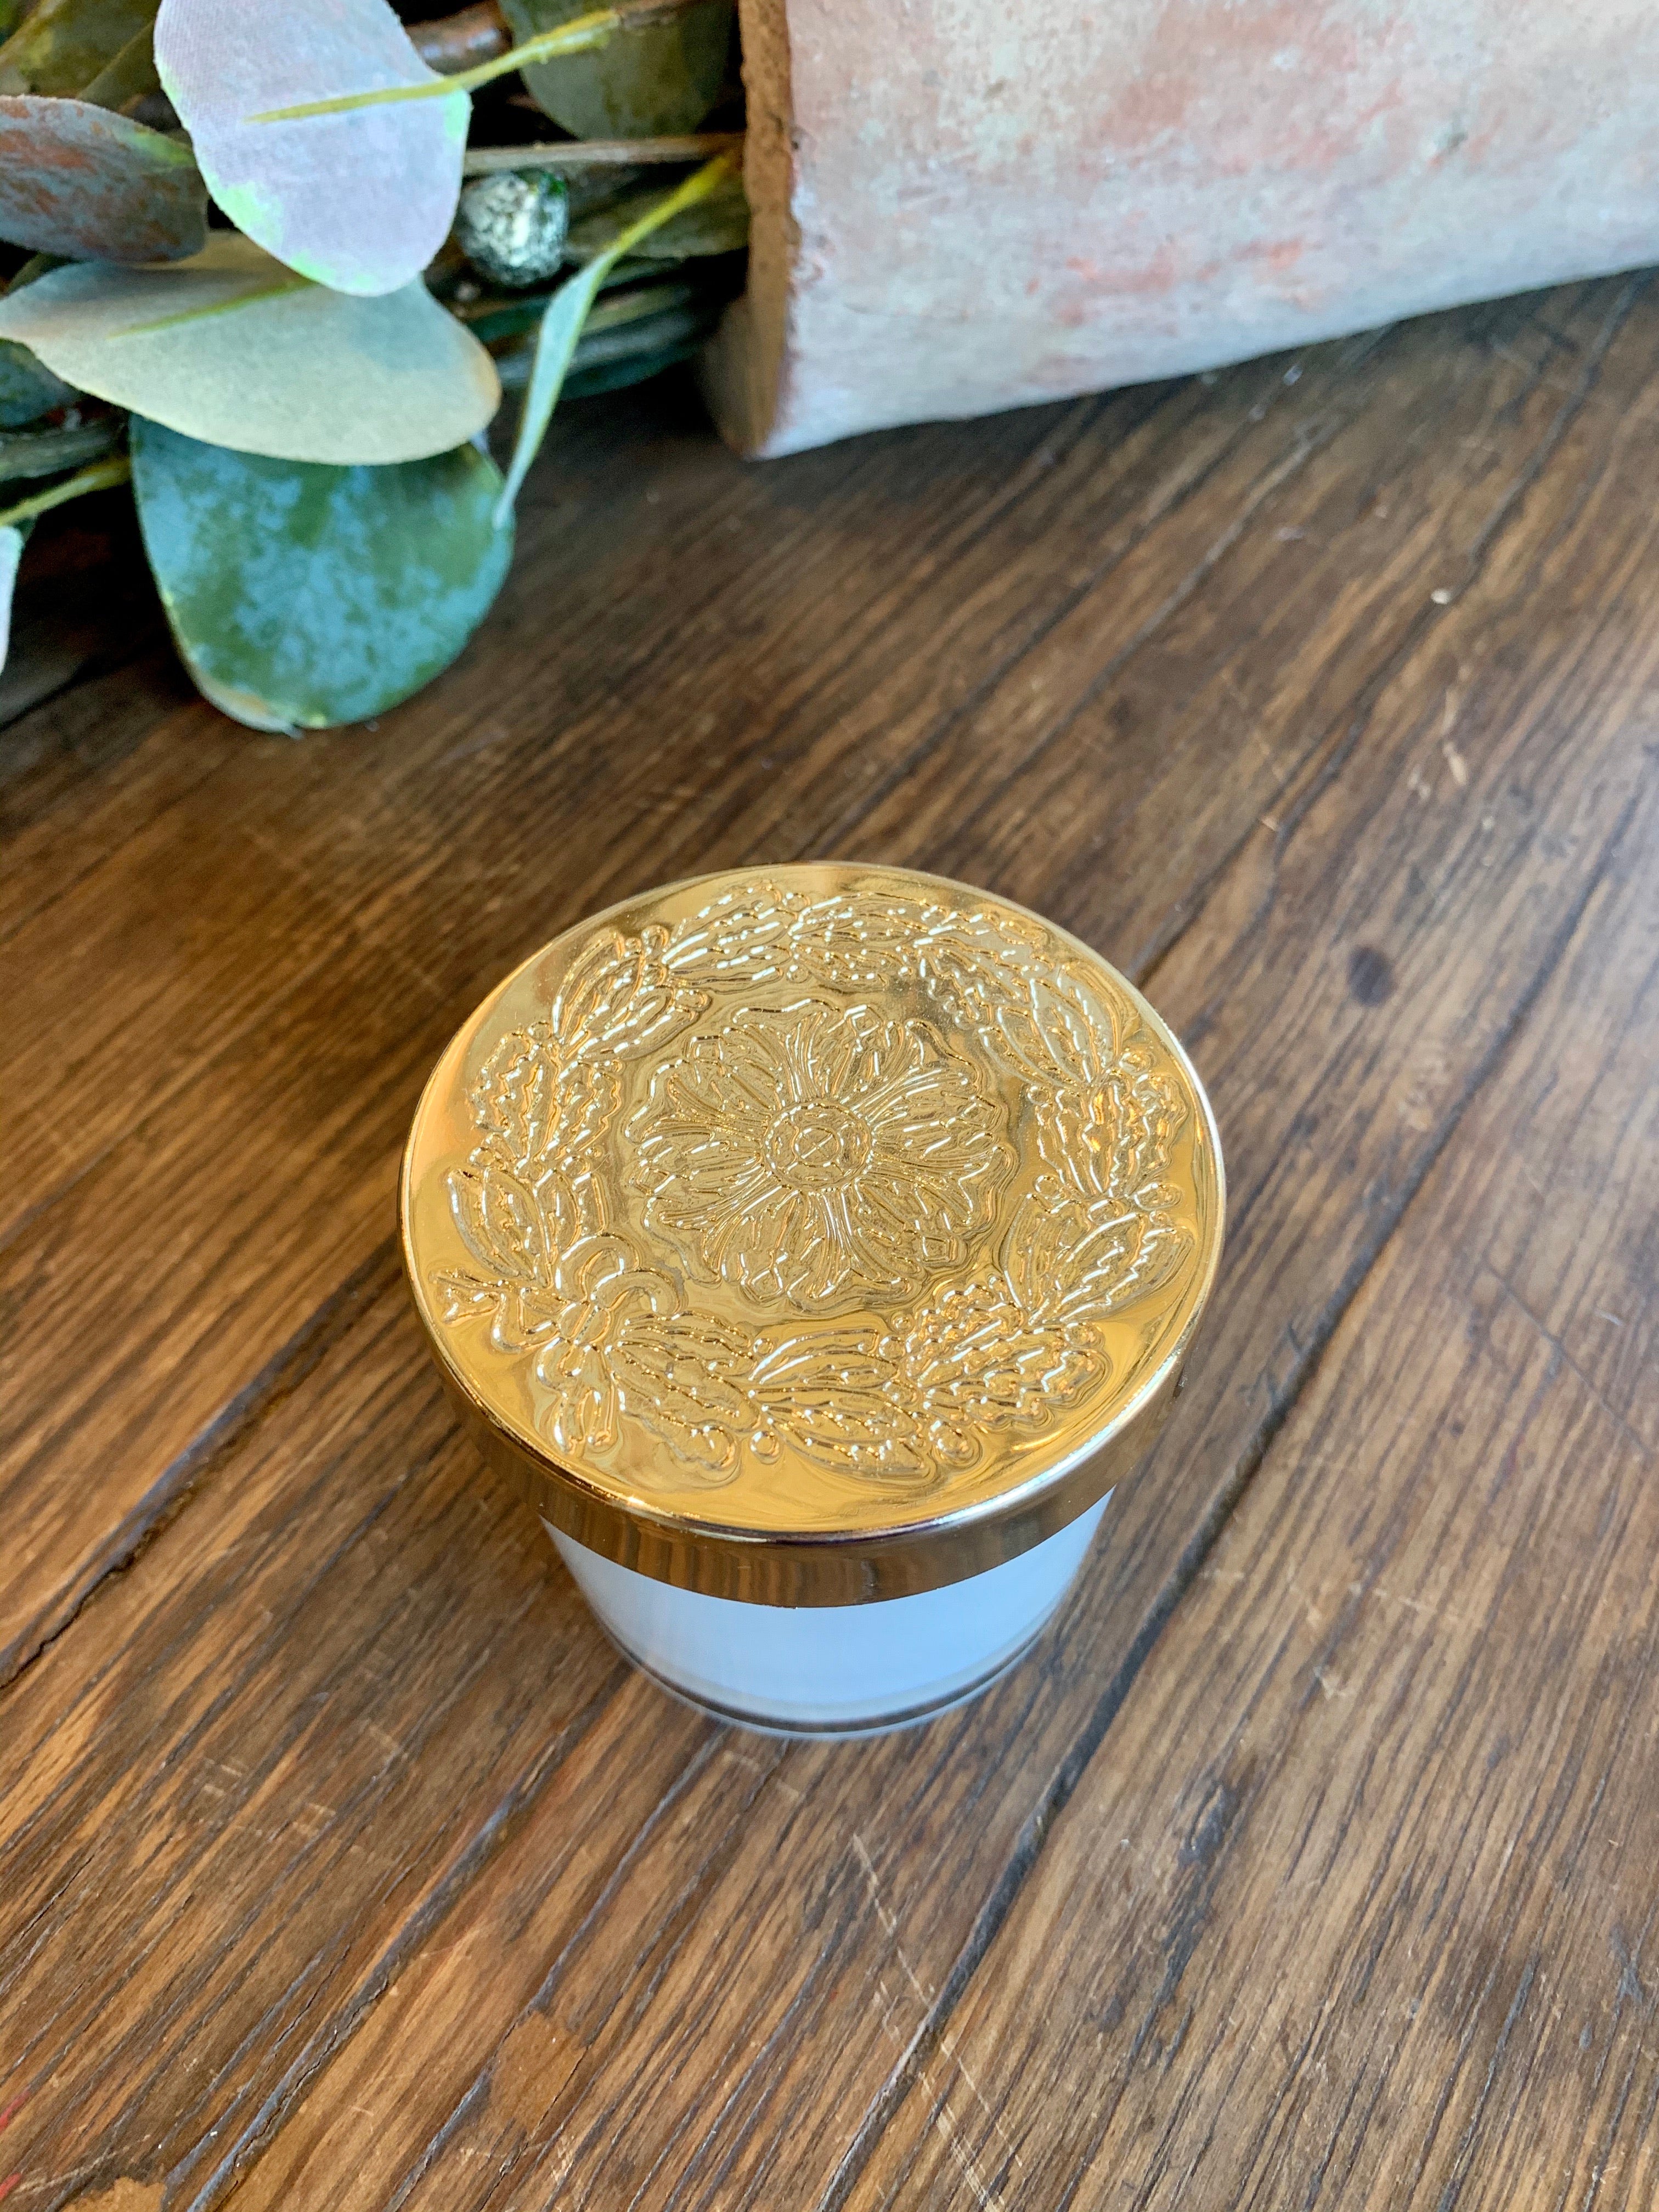 Small Lidded Candle - Grapefruit